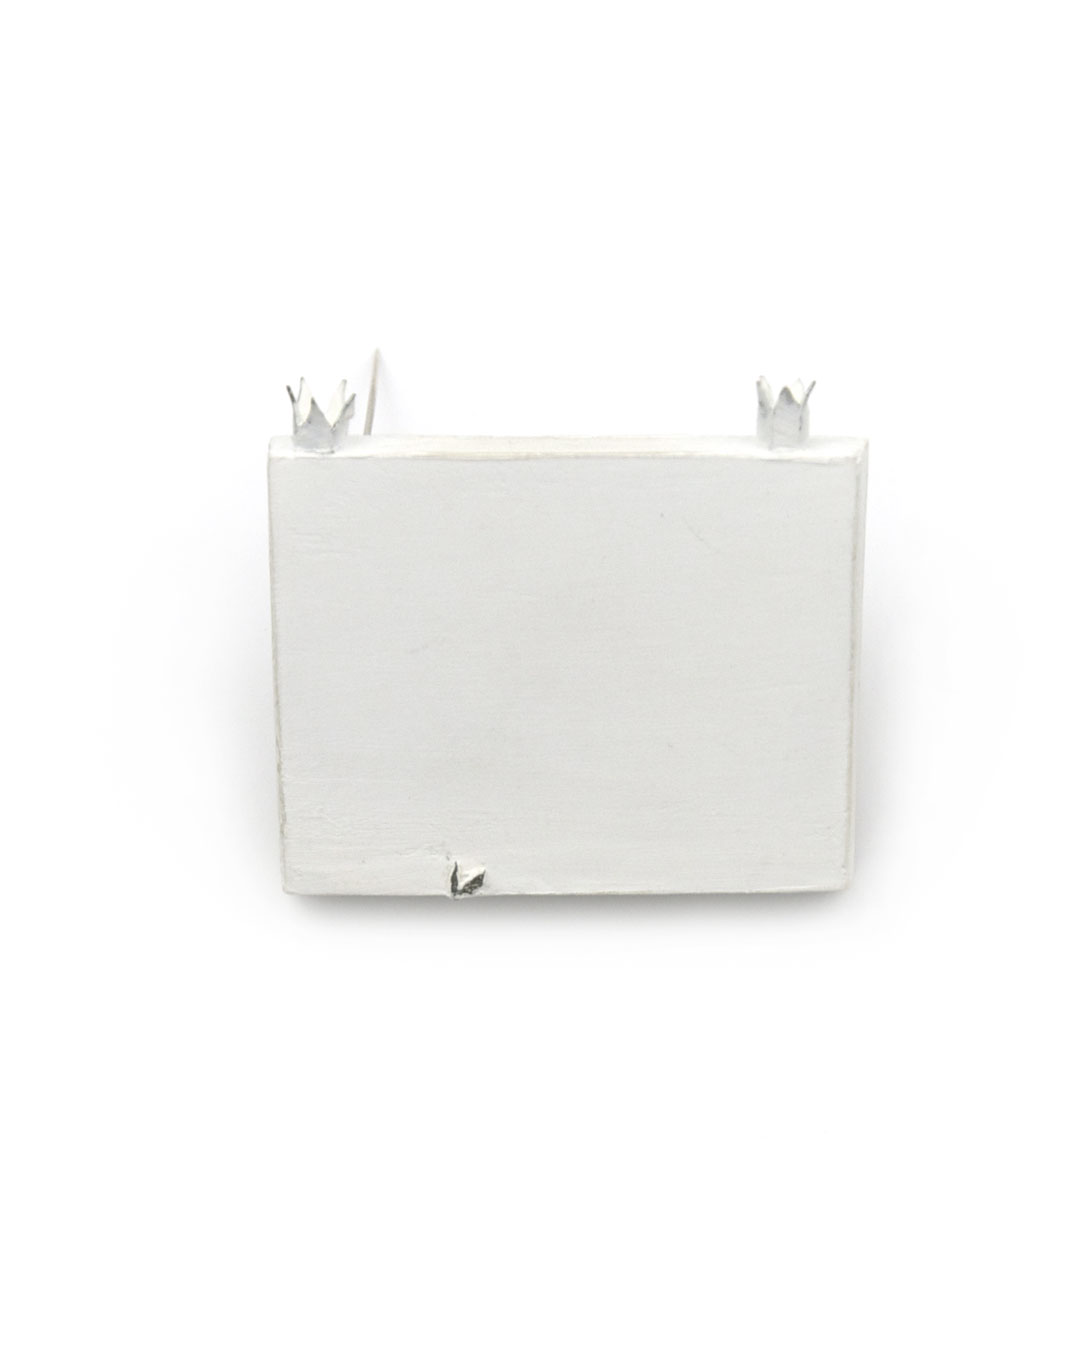 Piret Hirv, Letters of Flora 6, 1999, brooch; silver, paint, 43 x 50 x 11 mm, €415